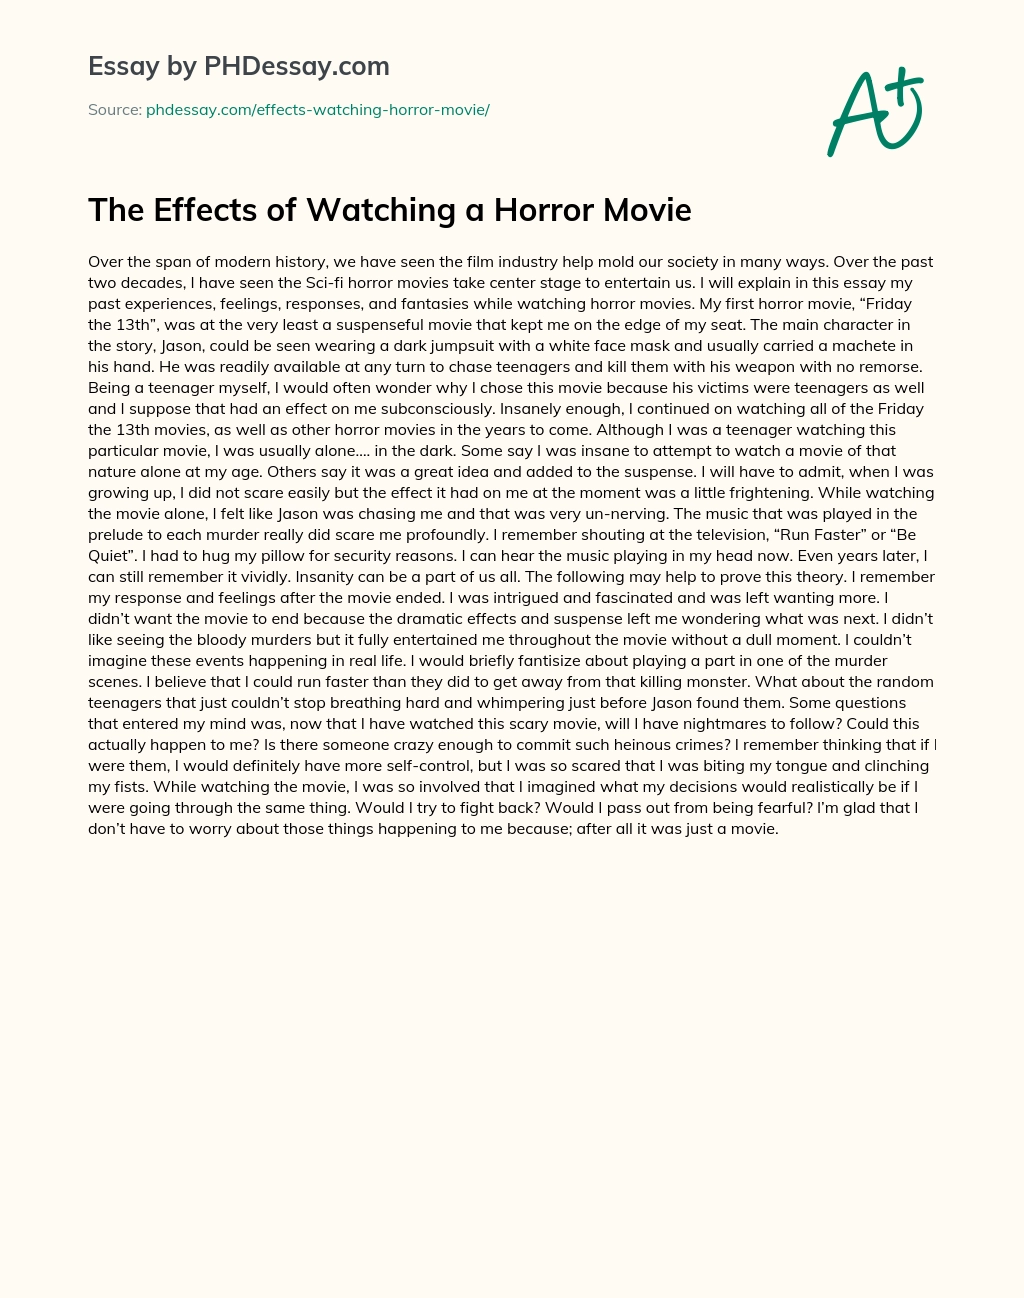 horror movies essay prompts